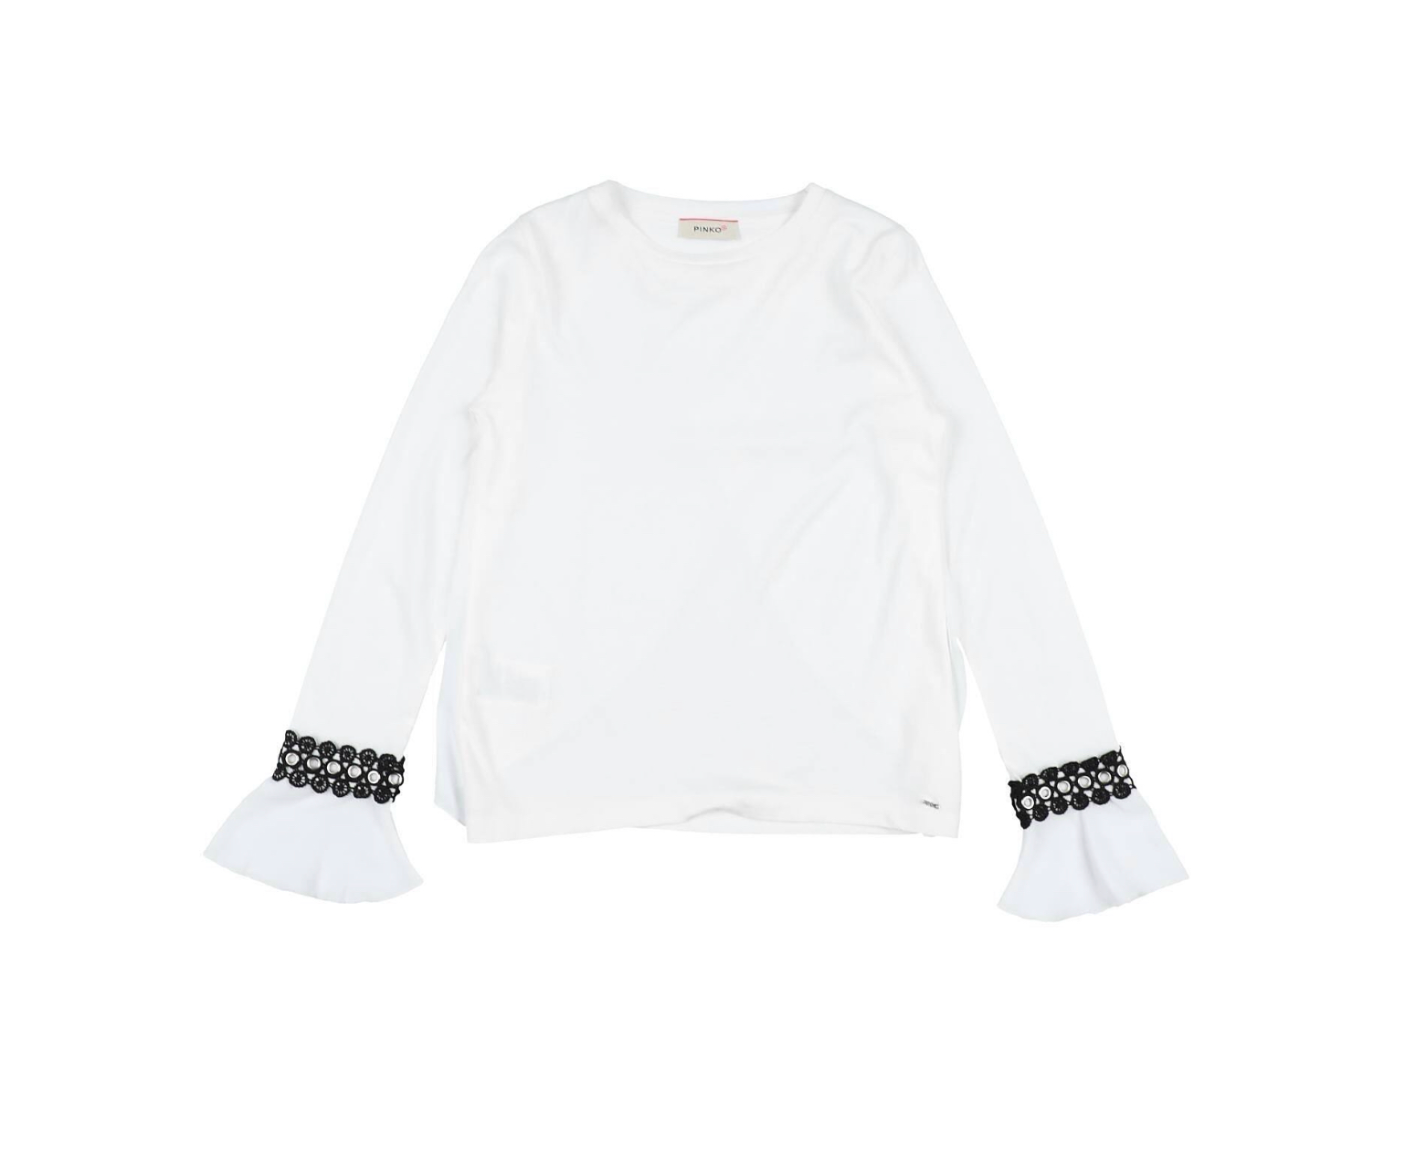 PINKO - White top - 8 years old